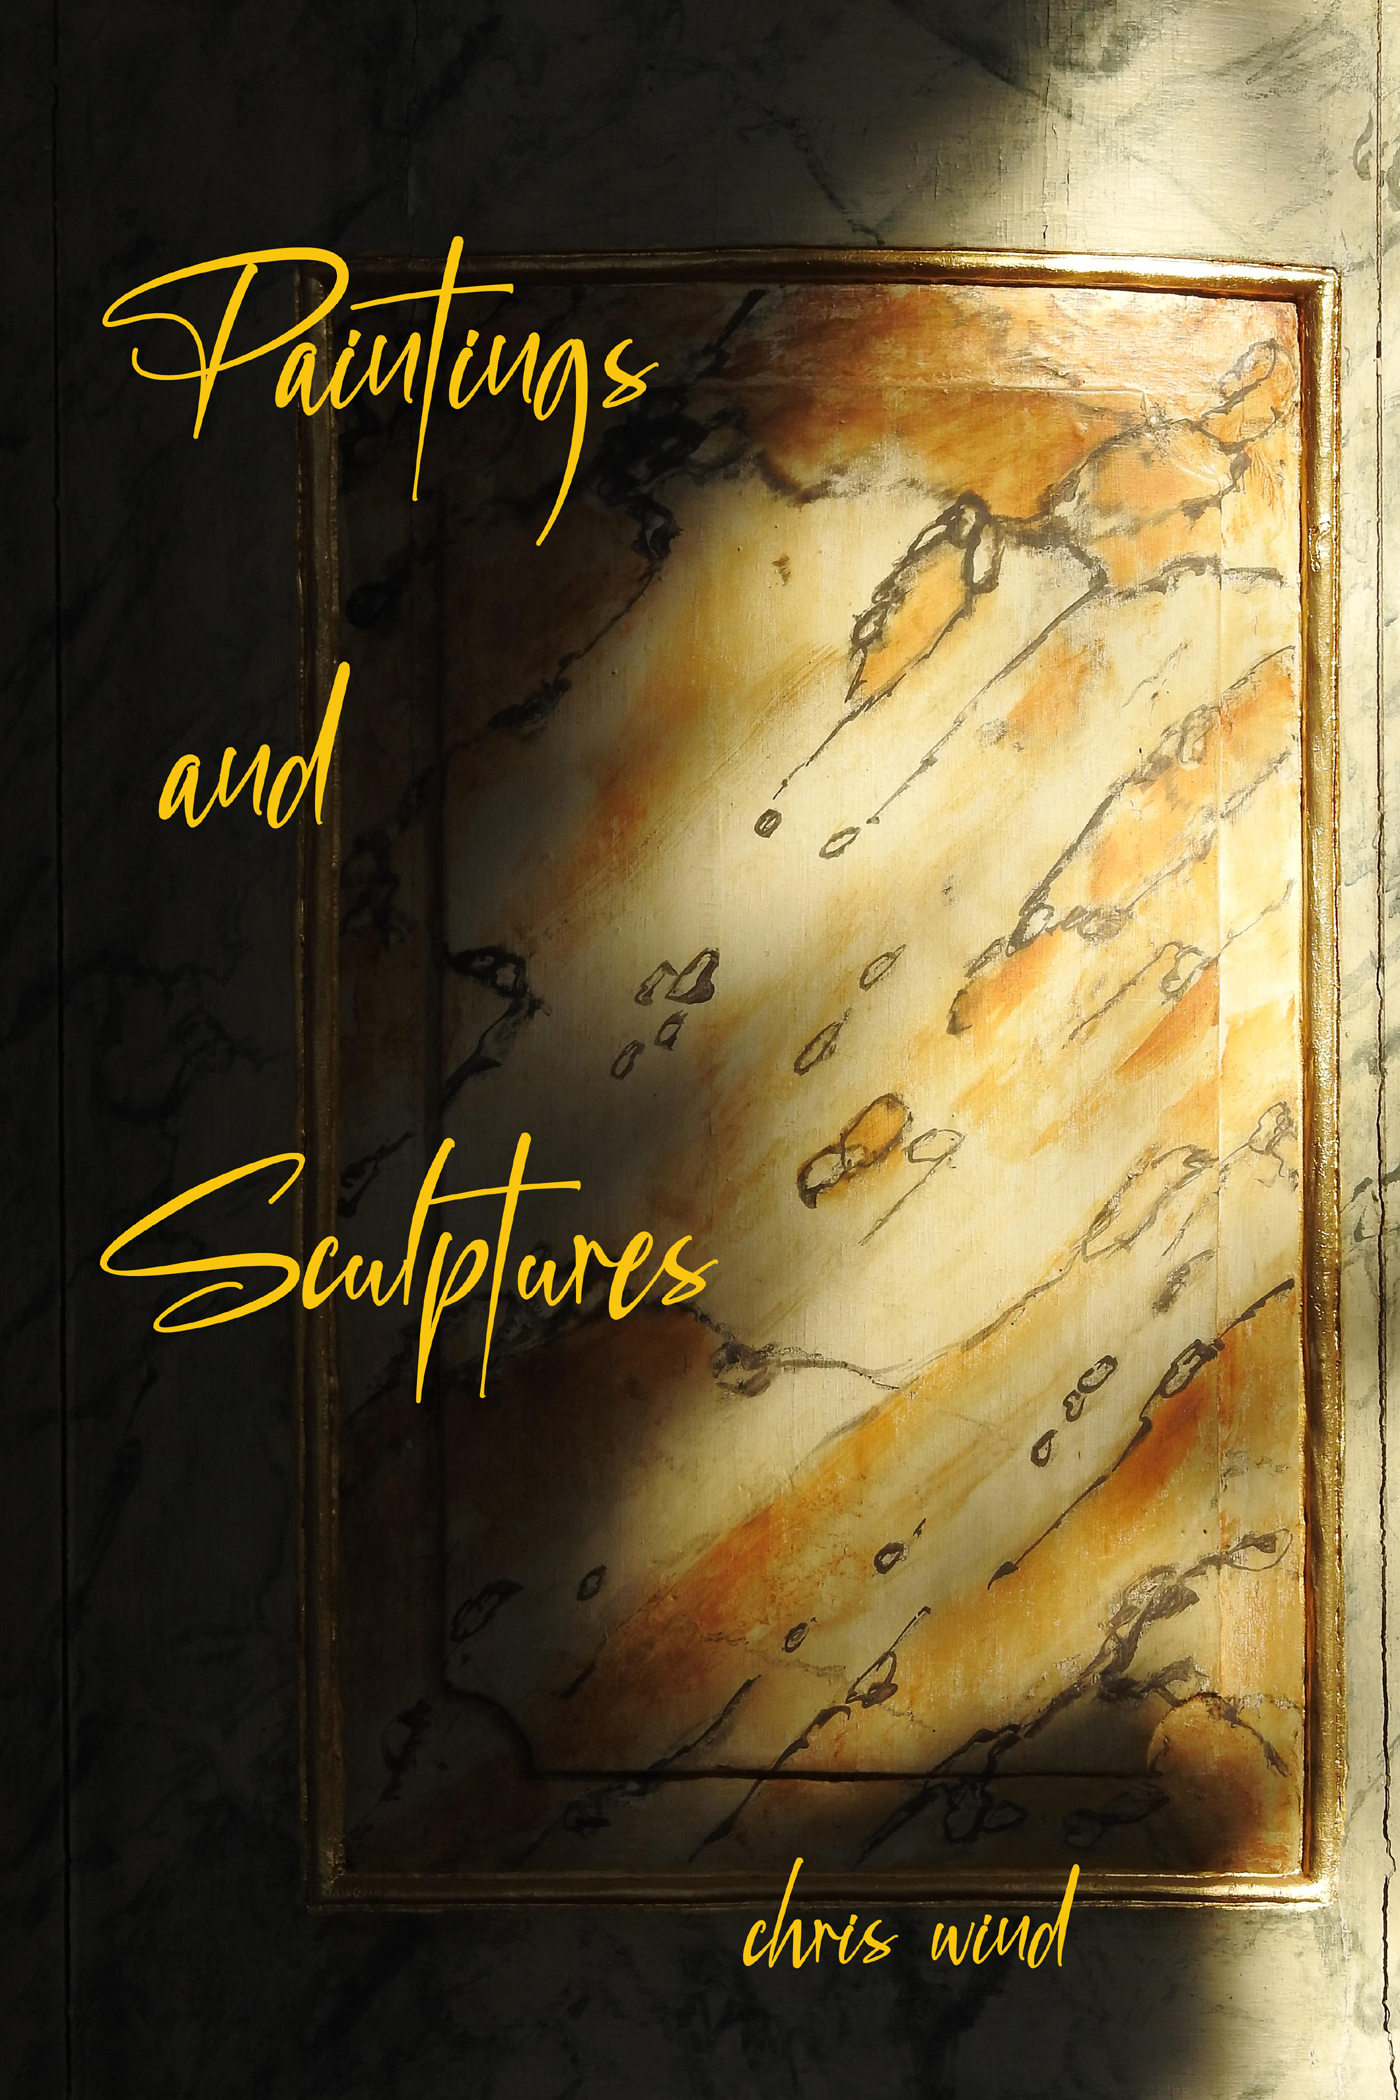 poems describing paintings and sculptures